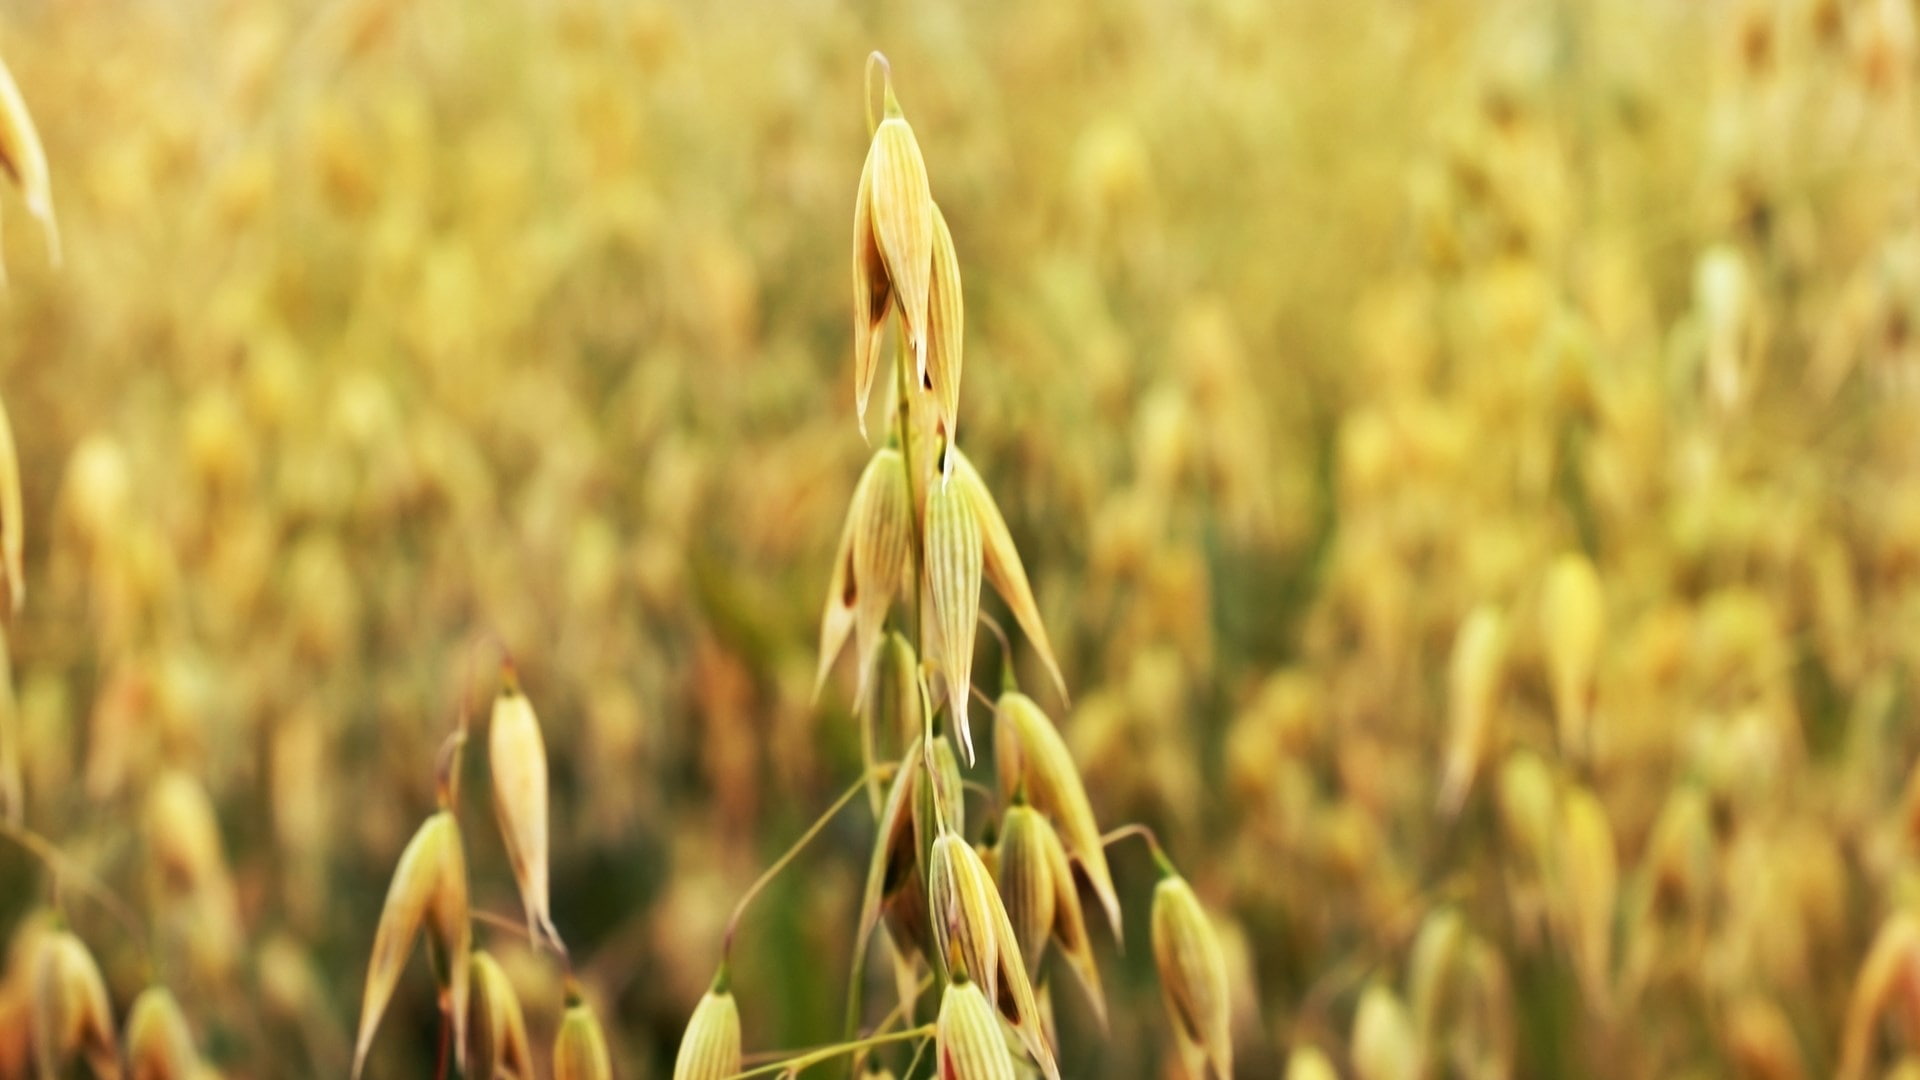 nature scenery images hd  1920x1080, agriculture, crop, cereal plant